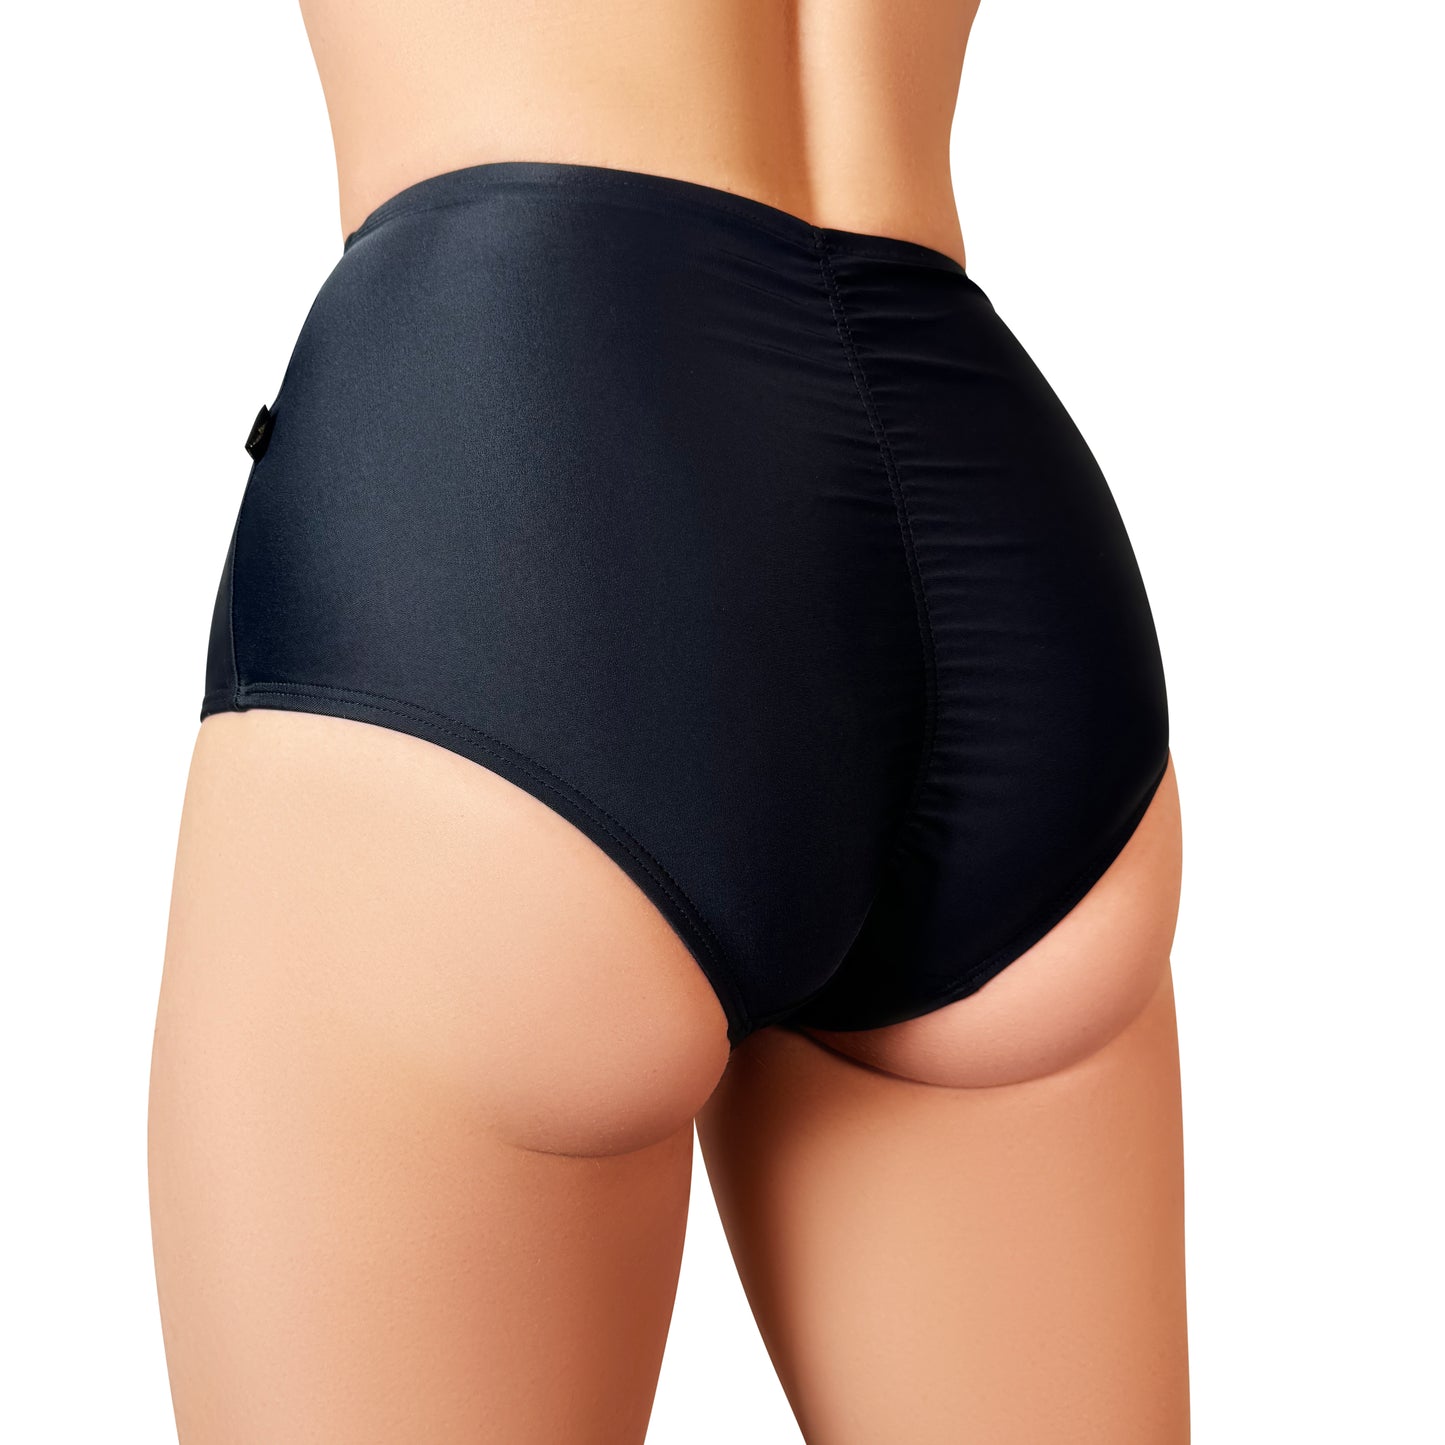 Essential Pin-up High Waisted Hot Pants - Black